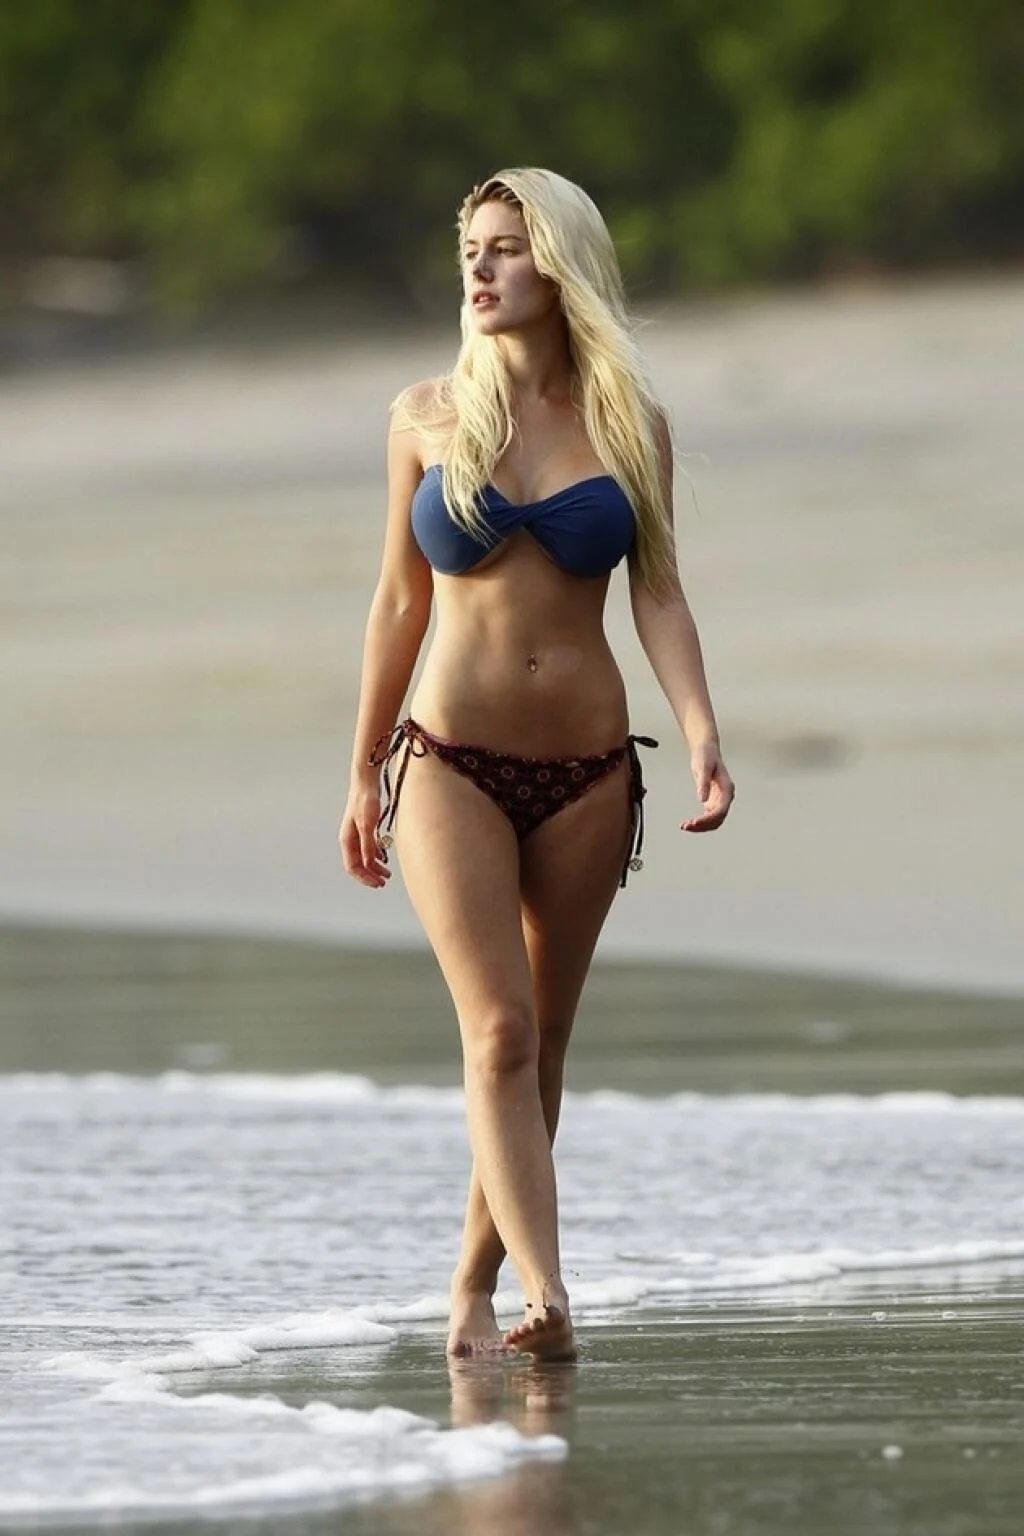 Picture tagged with: Blonde, Beach